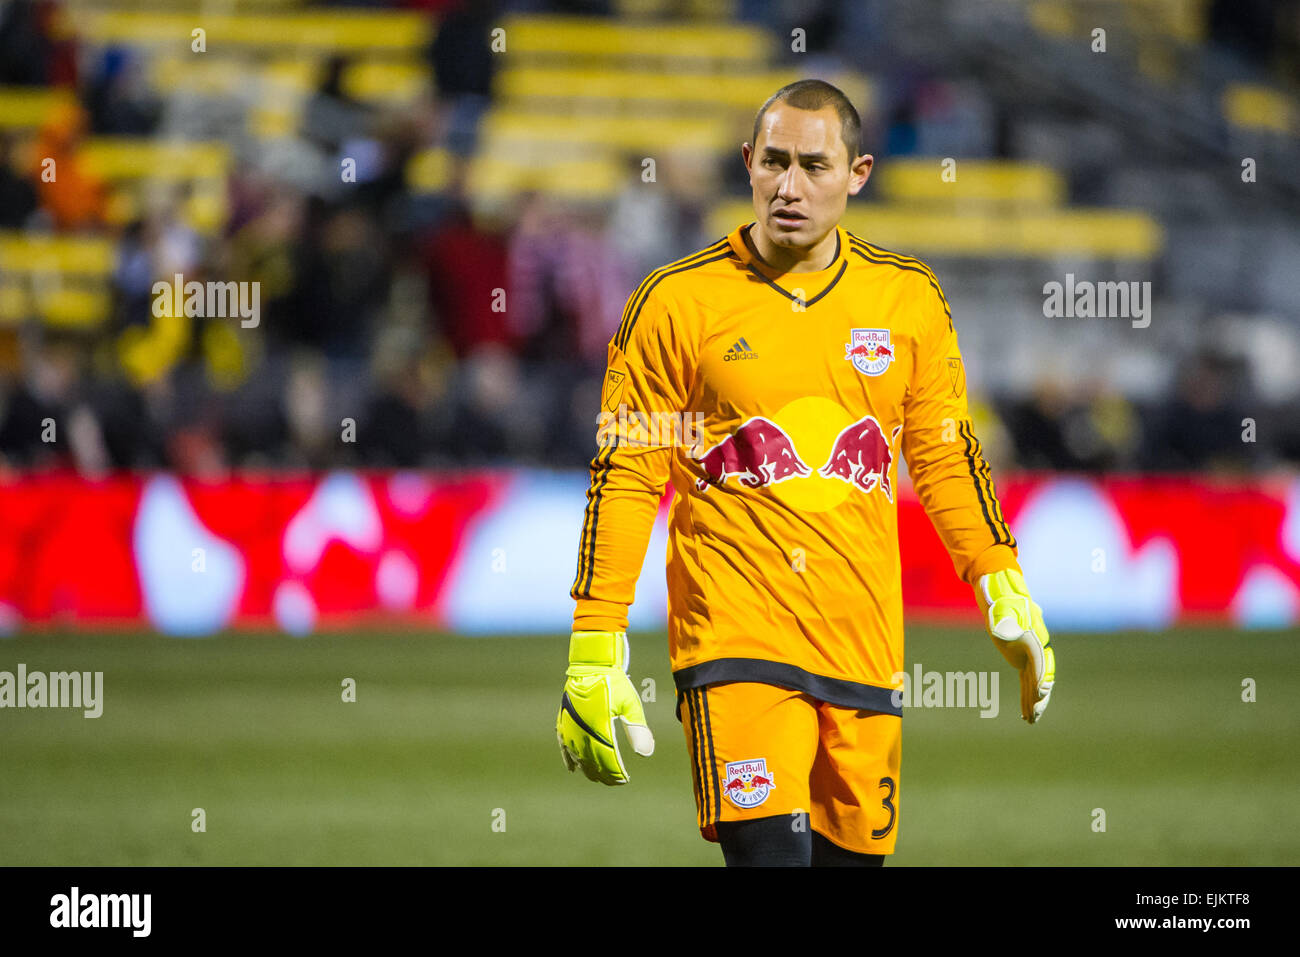 luis robles jersey